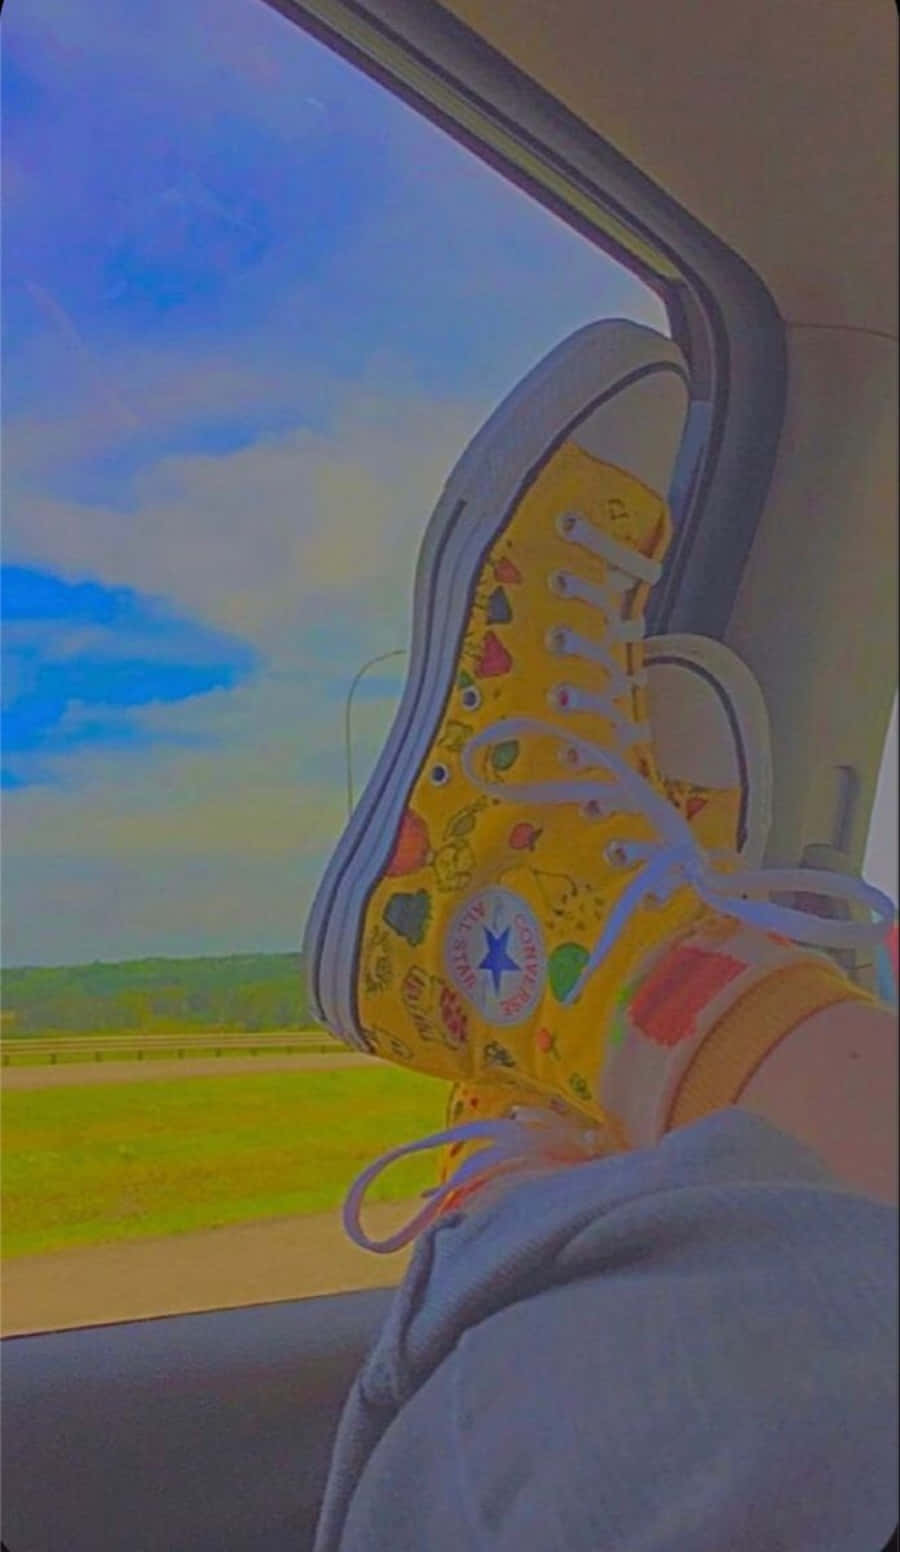 a person's feet are sitting in a car with yellow converse shoes